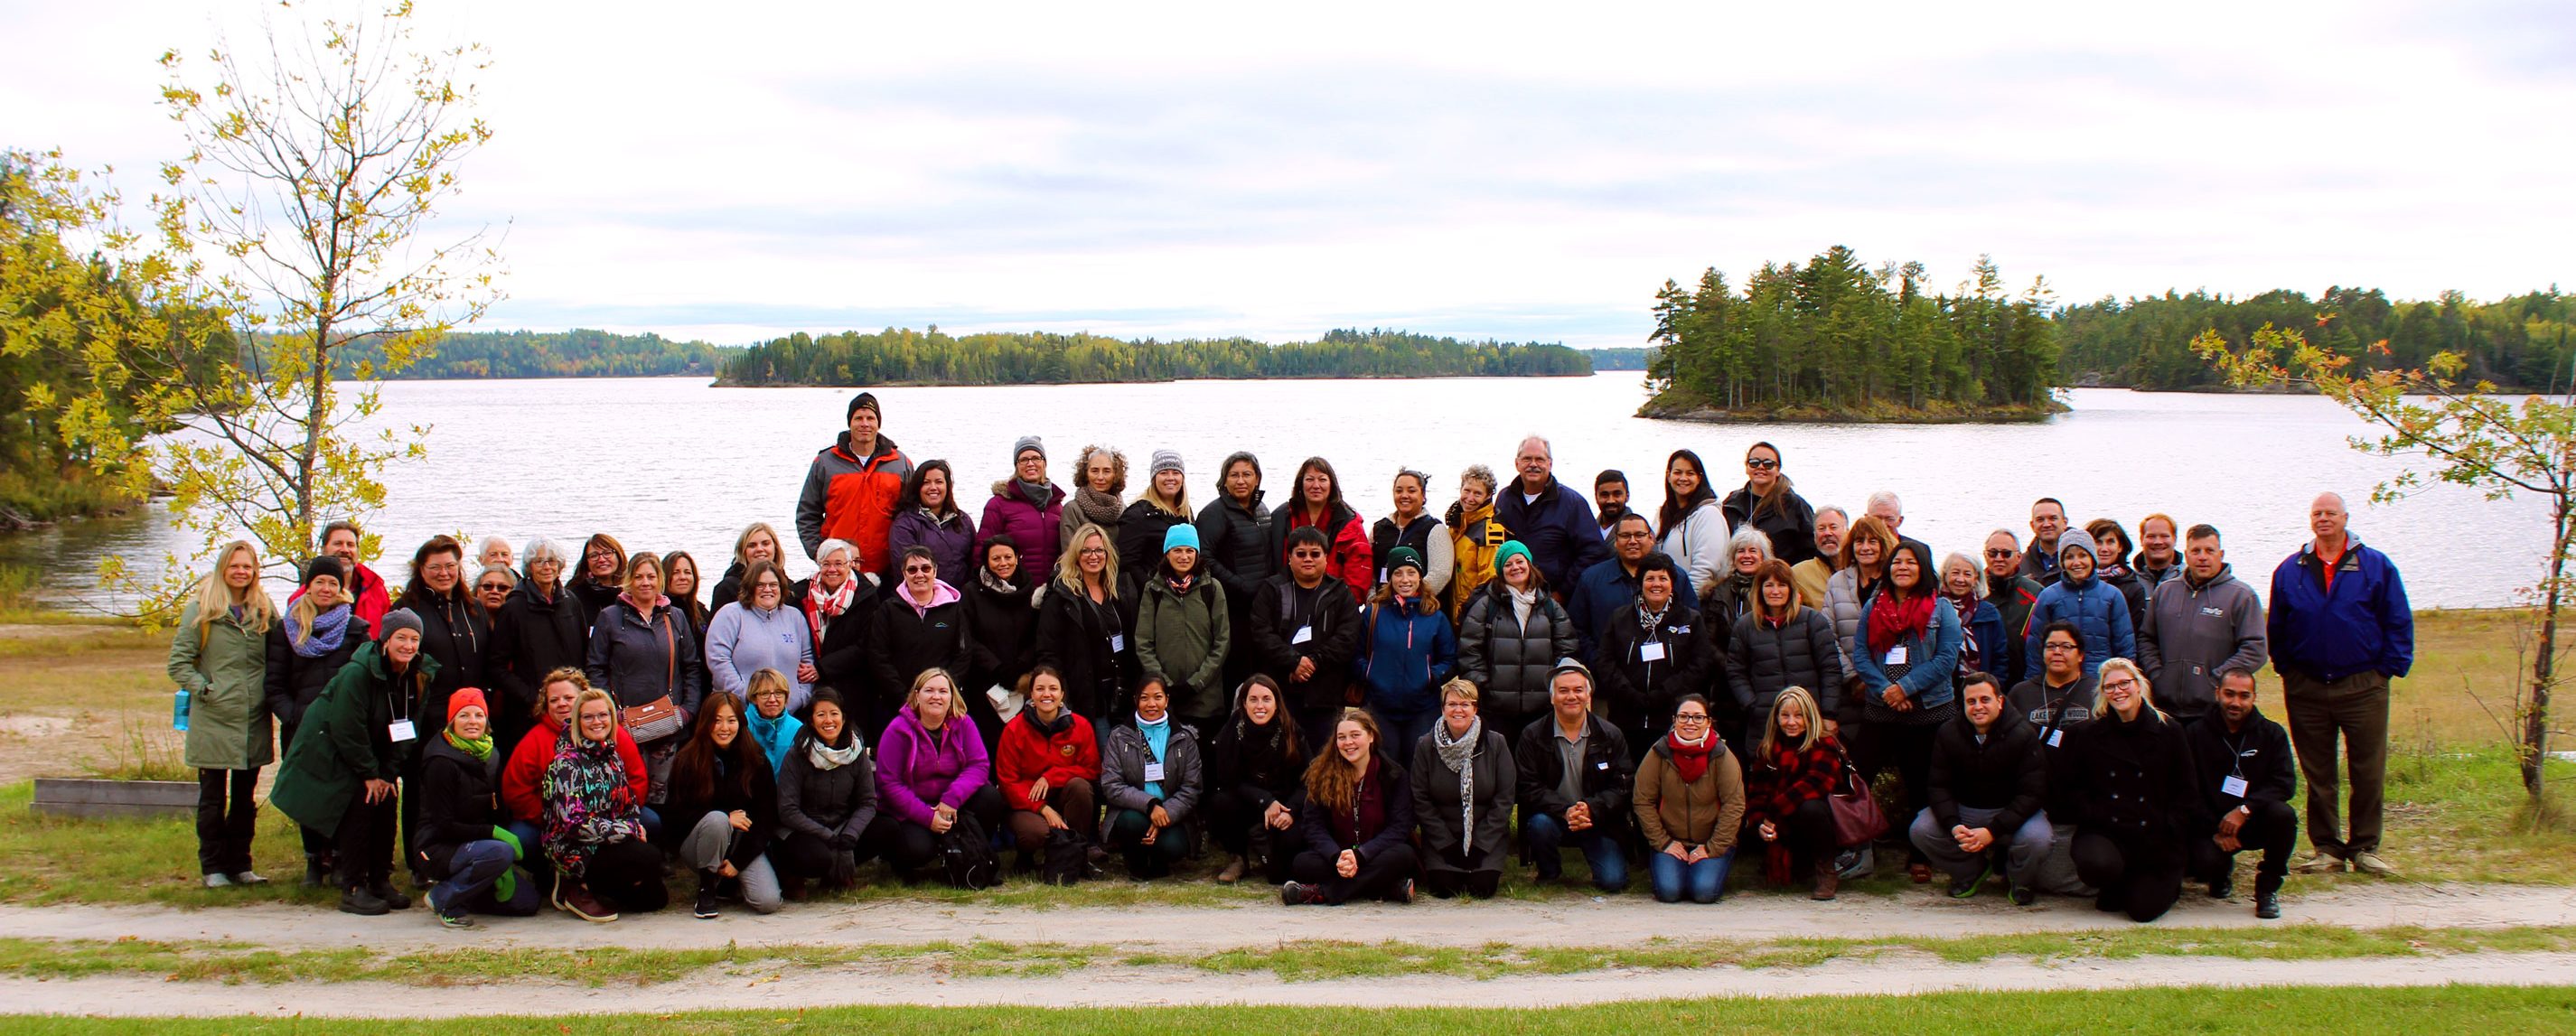 Gaa-izhi-izhitwaawaad anishinaabeg – Culturally Responsive Teaching and  Learning - The Robertson Program for Inquiry-based Teaching in Mathematics  and Science